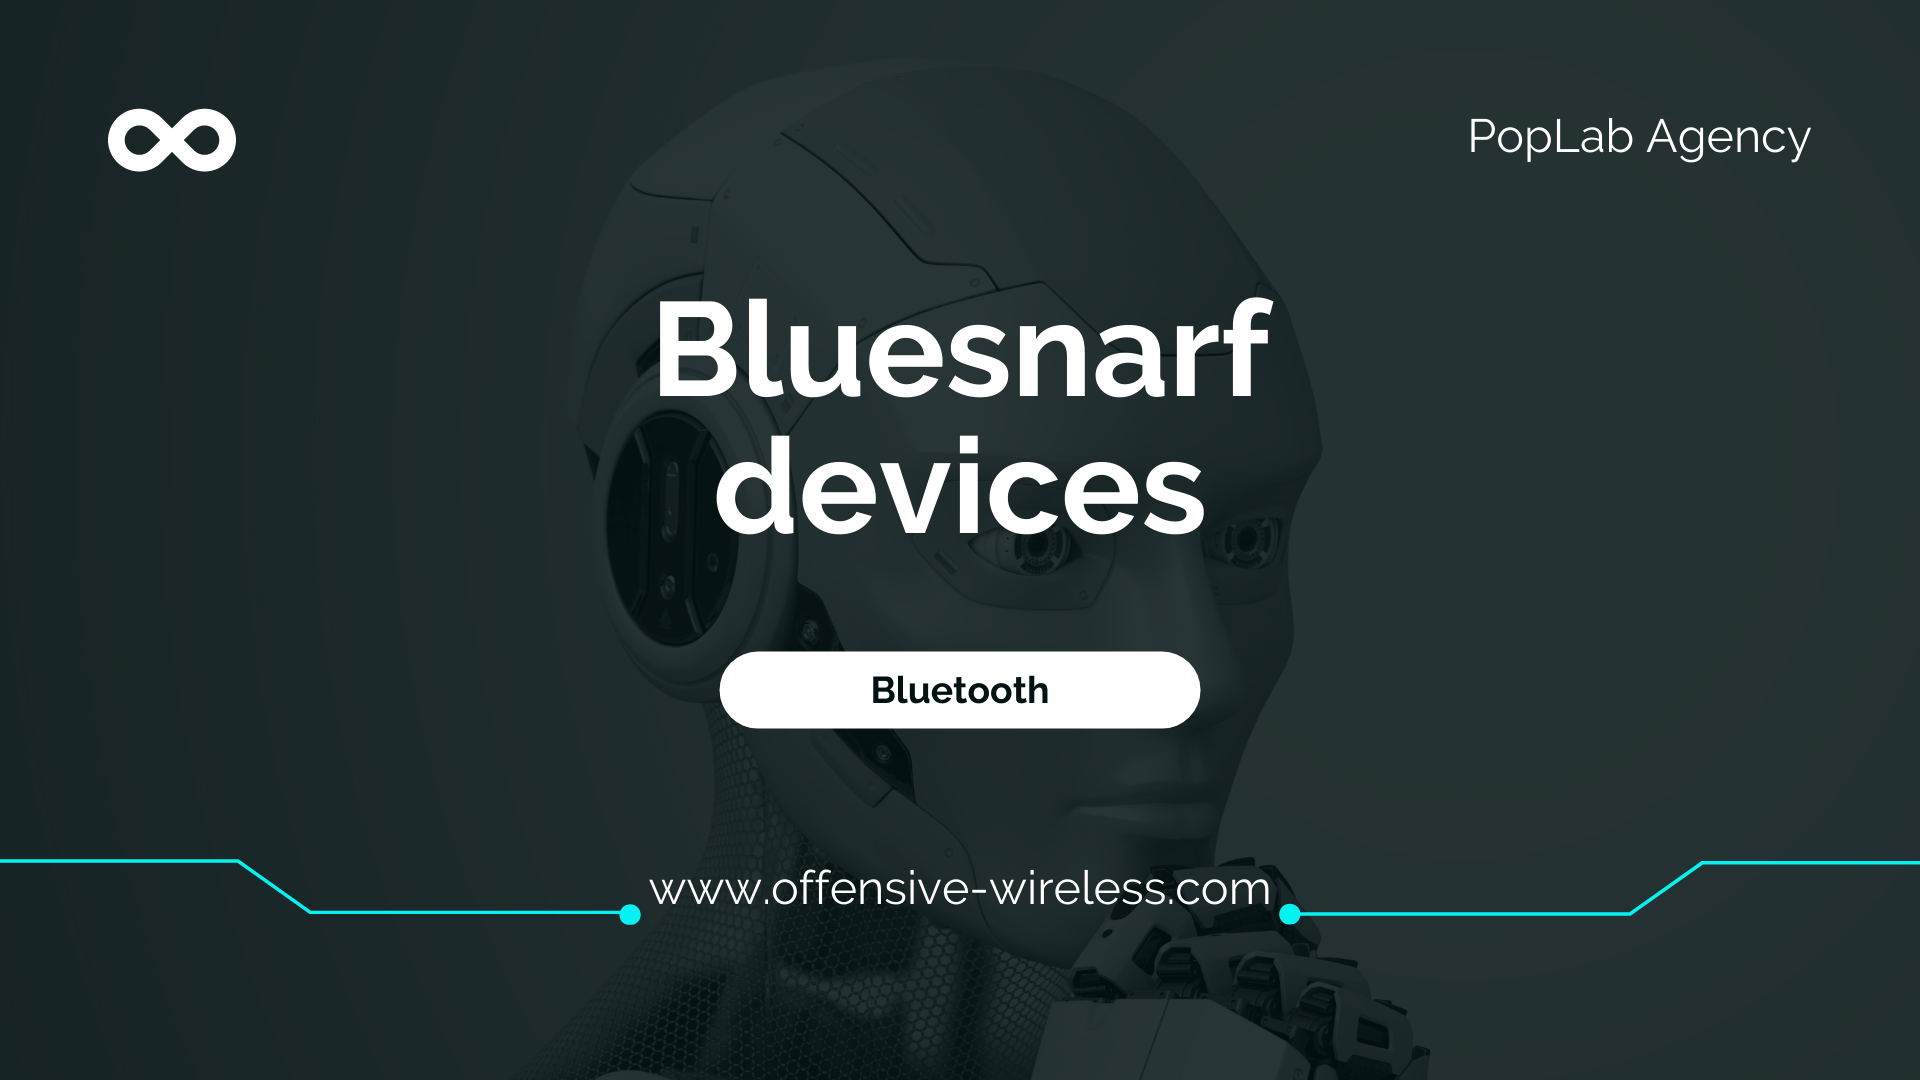 How to Bluesnarf devices 2022